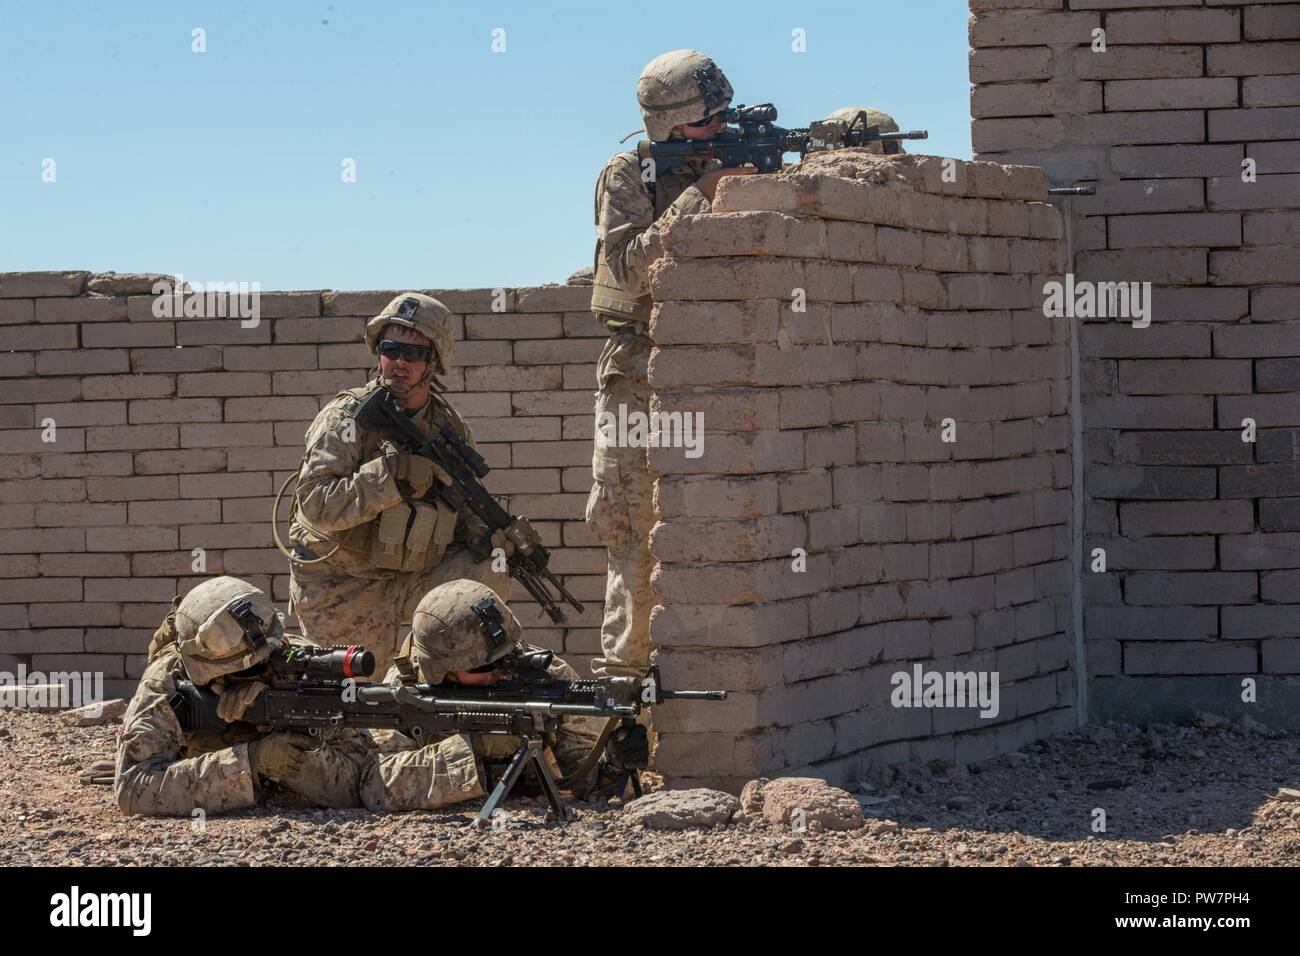 U.S. Marine Corps infantry Marines assigned to Kilo Company, 3rd Battalion, 1st Marines, conduct an urban training exercise during Weapons and Tactics Instructor Course (WTI) 1-18 in Yuma, Ariz., on Sept. 27, 2017. WTI is a seven week training event hosted by Marine Aviation Weapons Tactics Squadron One (MAWTS-1) cadre which emphasizes operational integration of the six functions of Marine Corps Aviation in support of a Marine Air Ground Task Force. MAWTS-1 provides standardized advanced tactical training and certification of unit instructor qualifications to support Marine Aviation Training a Stock Photo